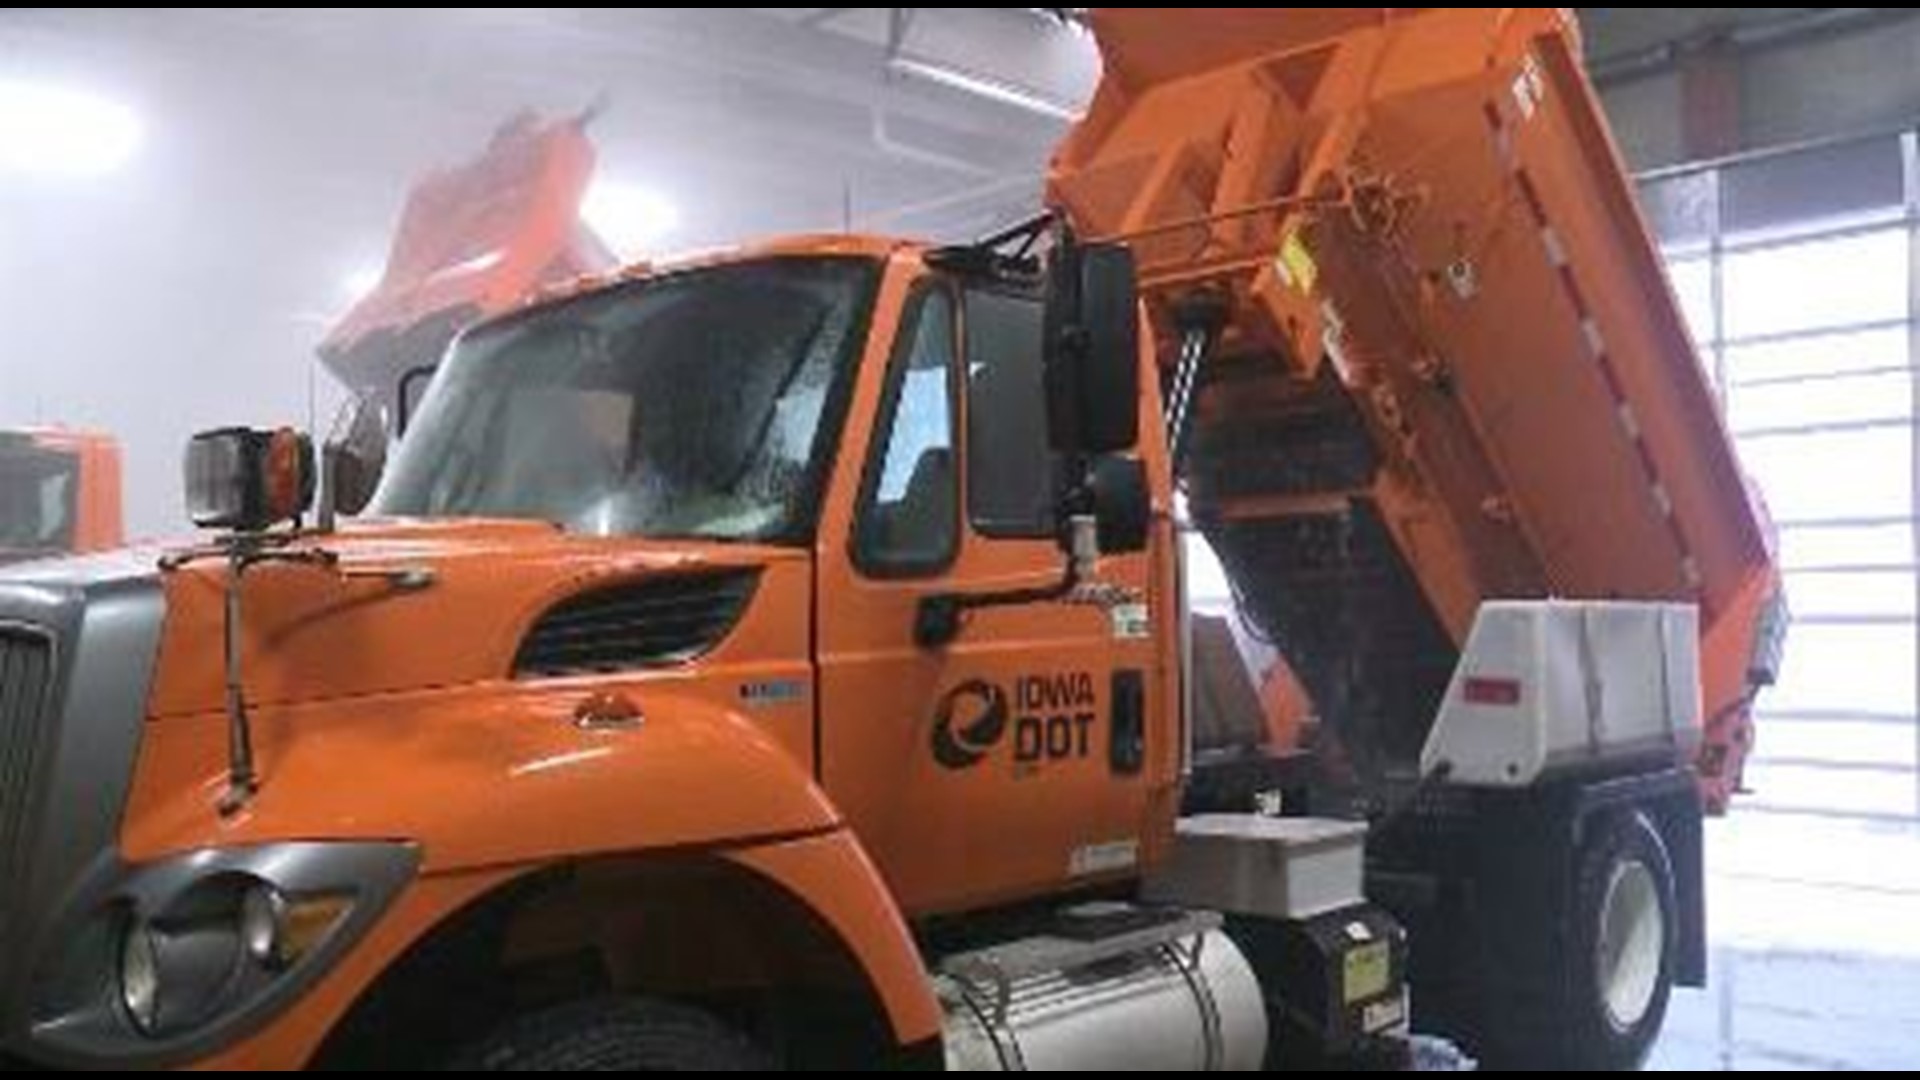 News 8 catches up with Iowa DOT's winter operations administrator Craig Bargfrede on how crews prepare for snowy conditions.